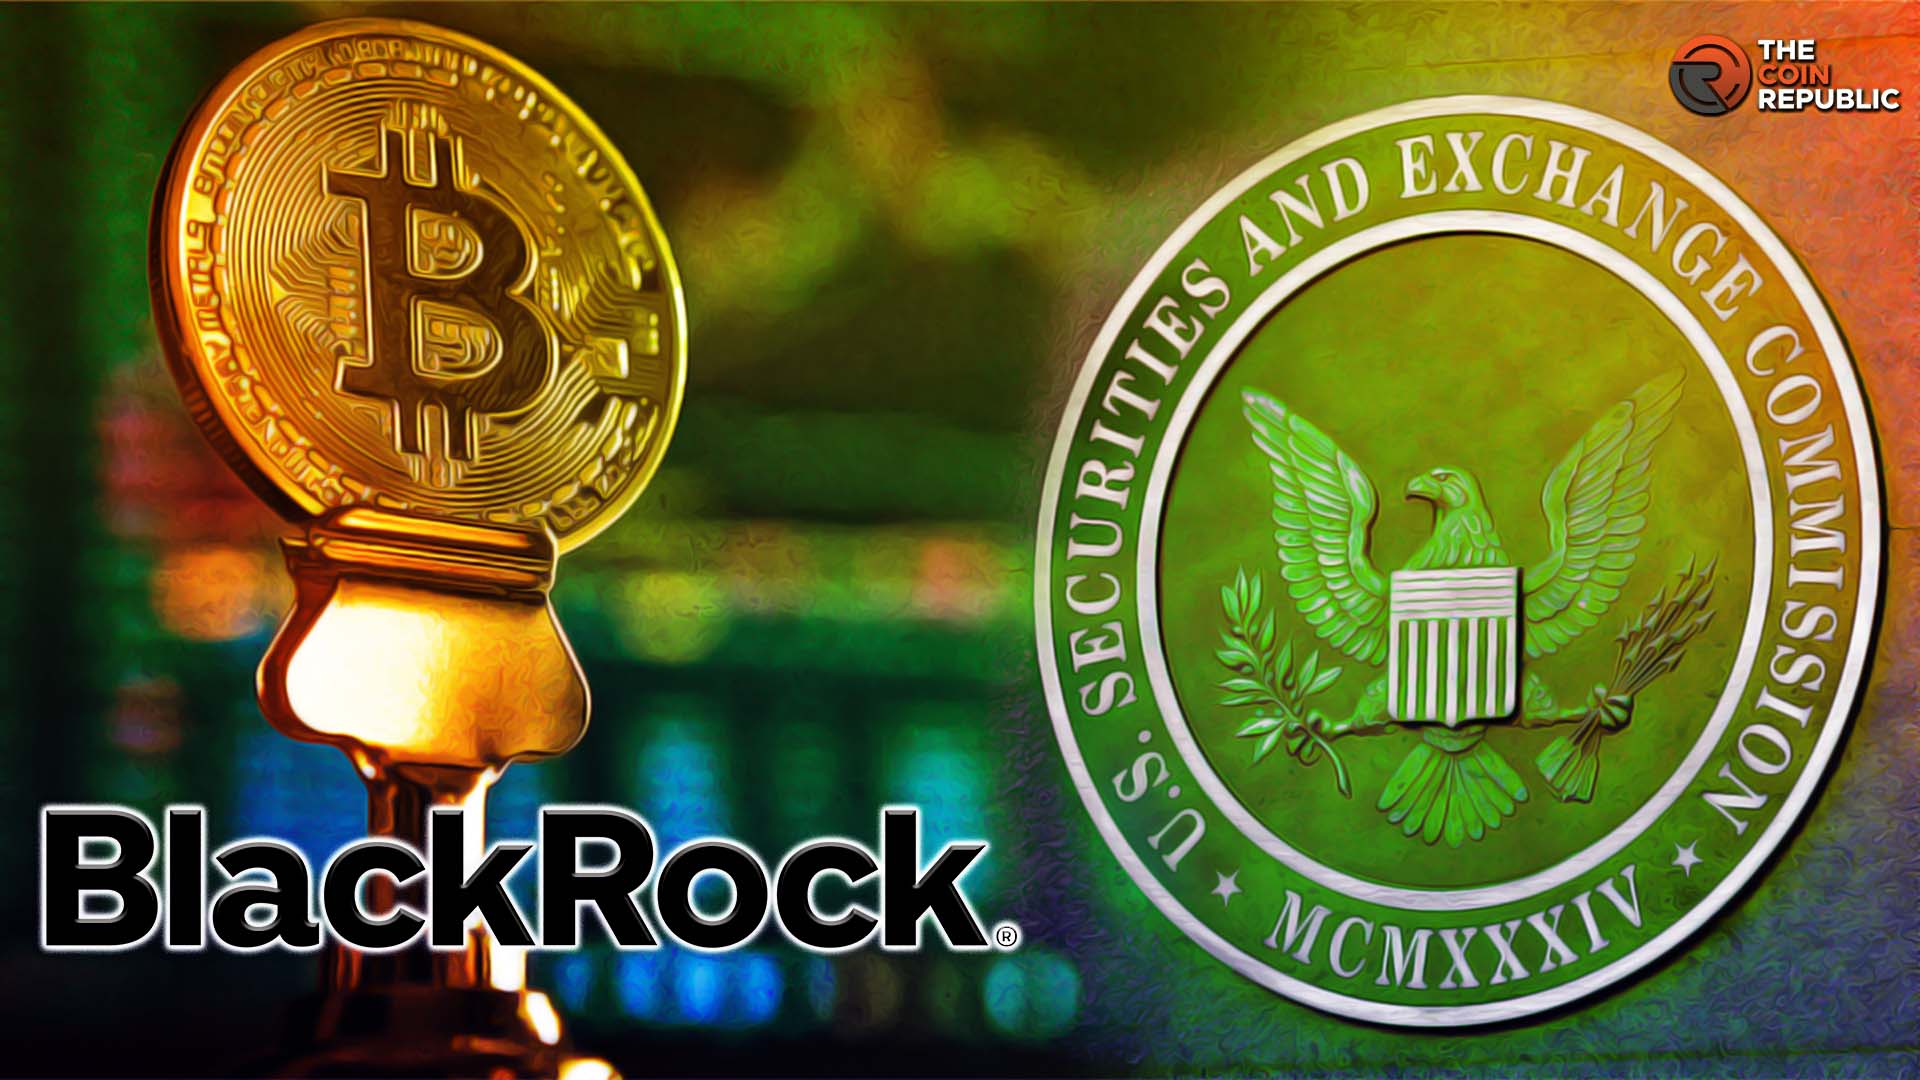 BlackRock’s Bitcoin ETF Application Accepted by SEC for Review